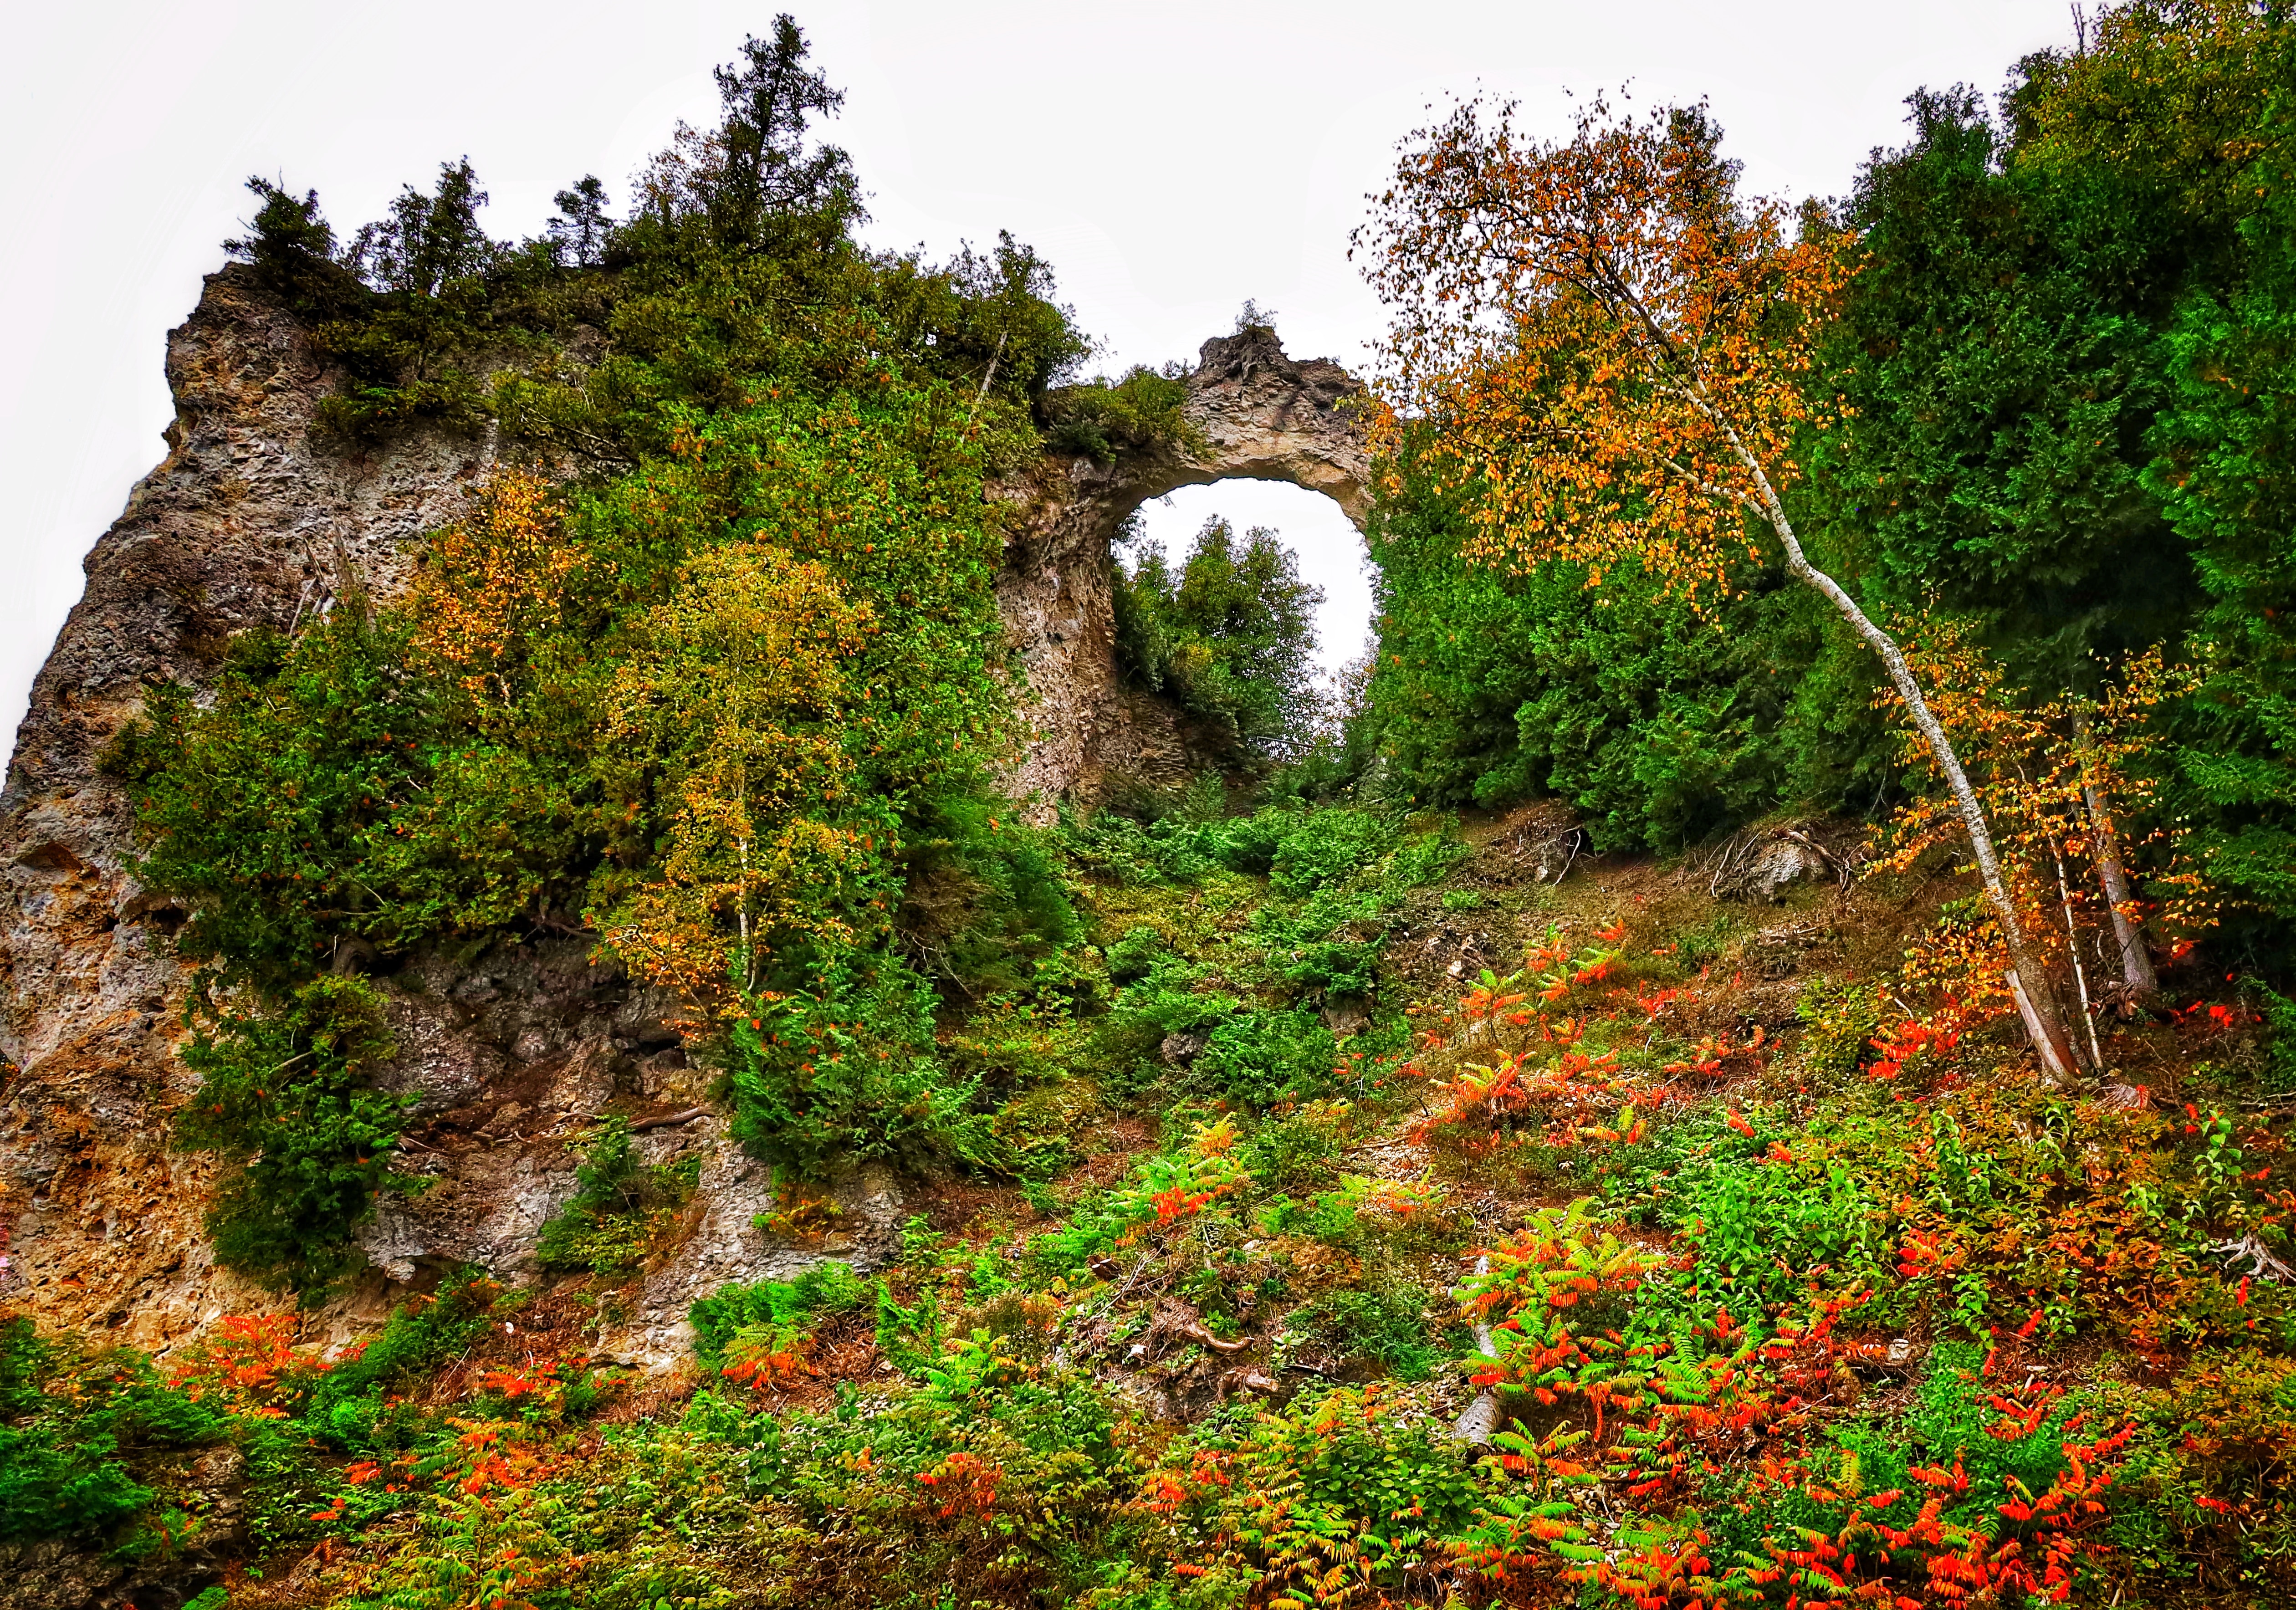 Arch Rock on Mackinac Island seen from below, autumn foliage on the cliff side below